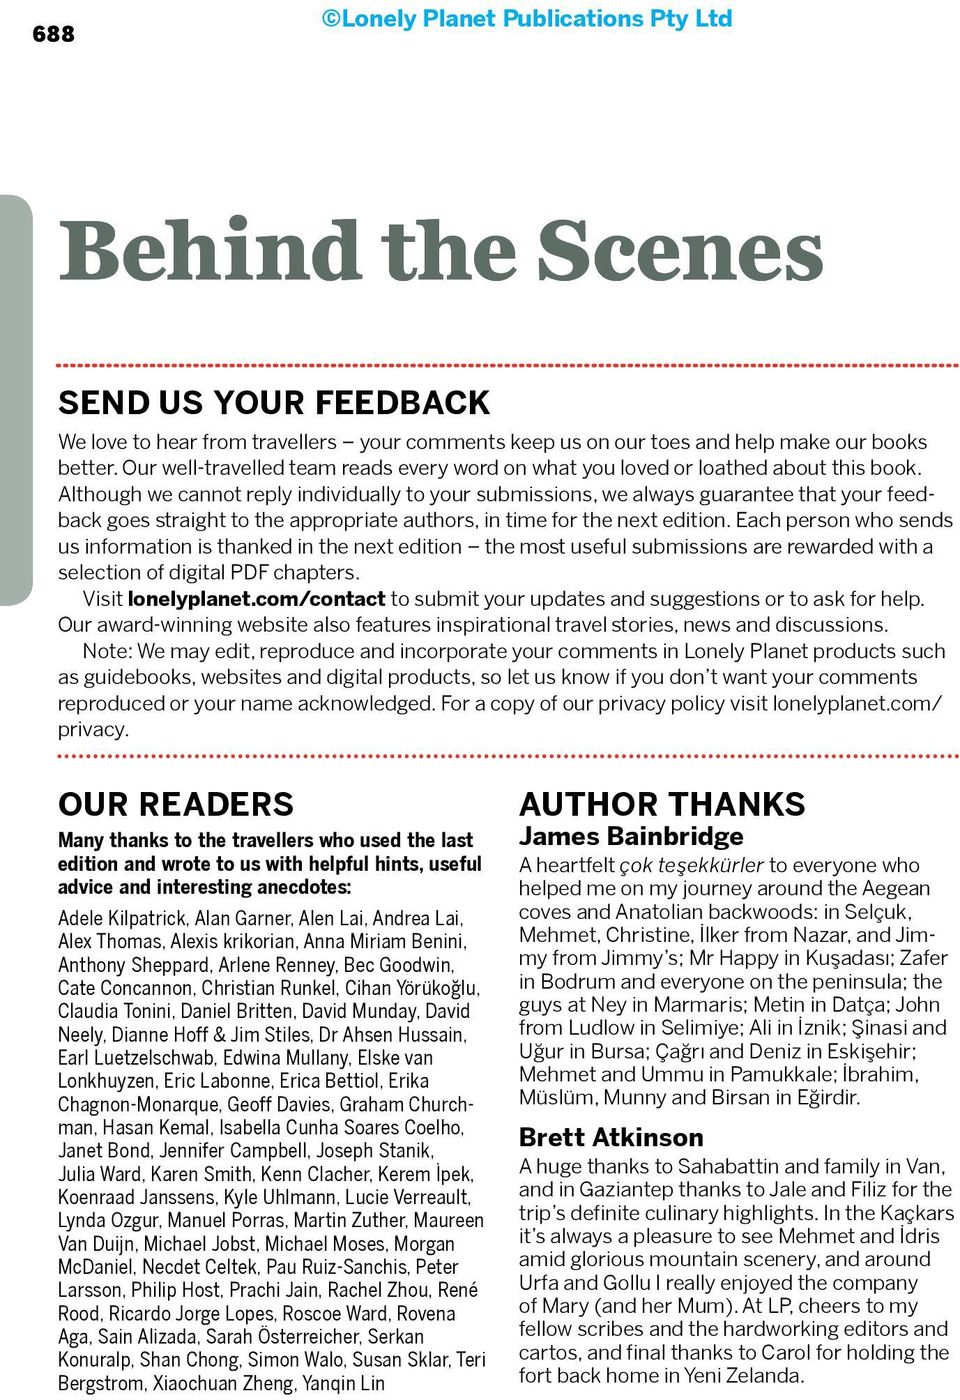 Although we cannot reply individually to your submissions, we always guarantee that your feedback goes straight to the appropriate authors, in time for the next edition.